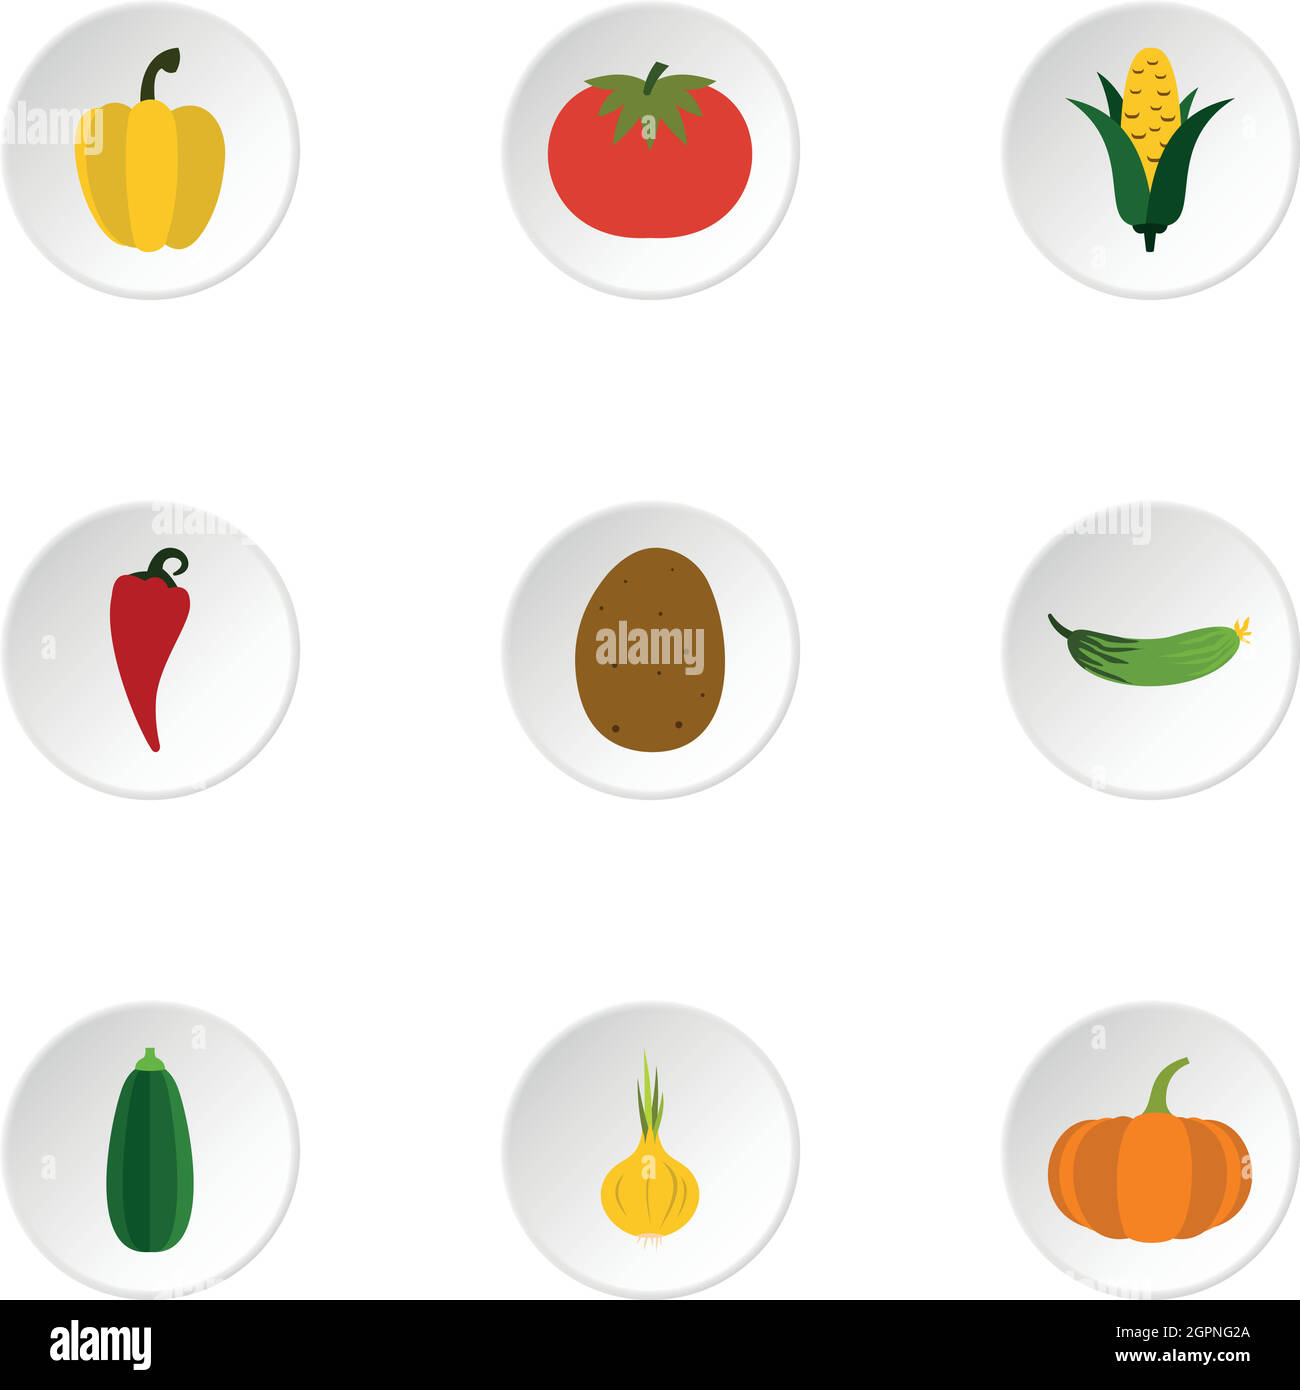 Vegetables icons set, flat style Stock Vector